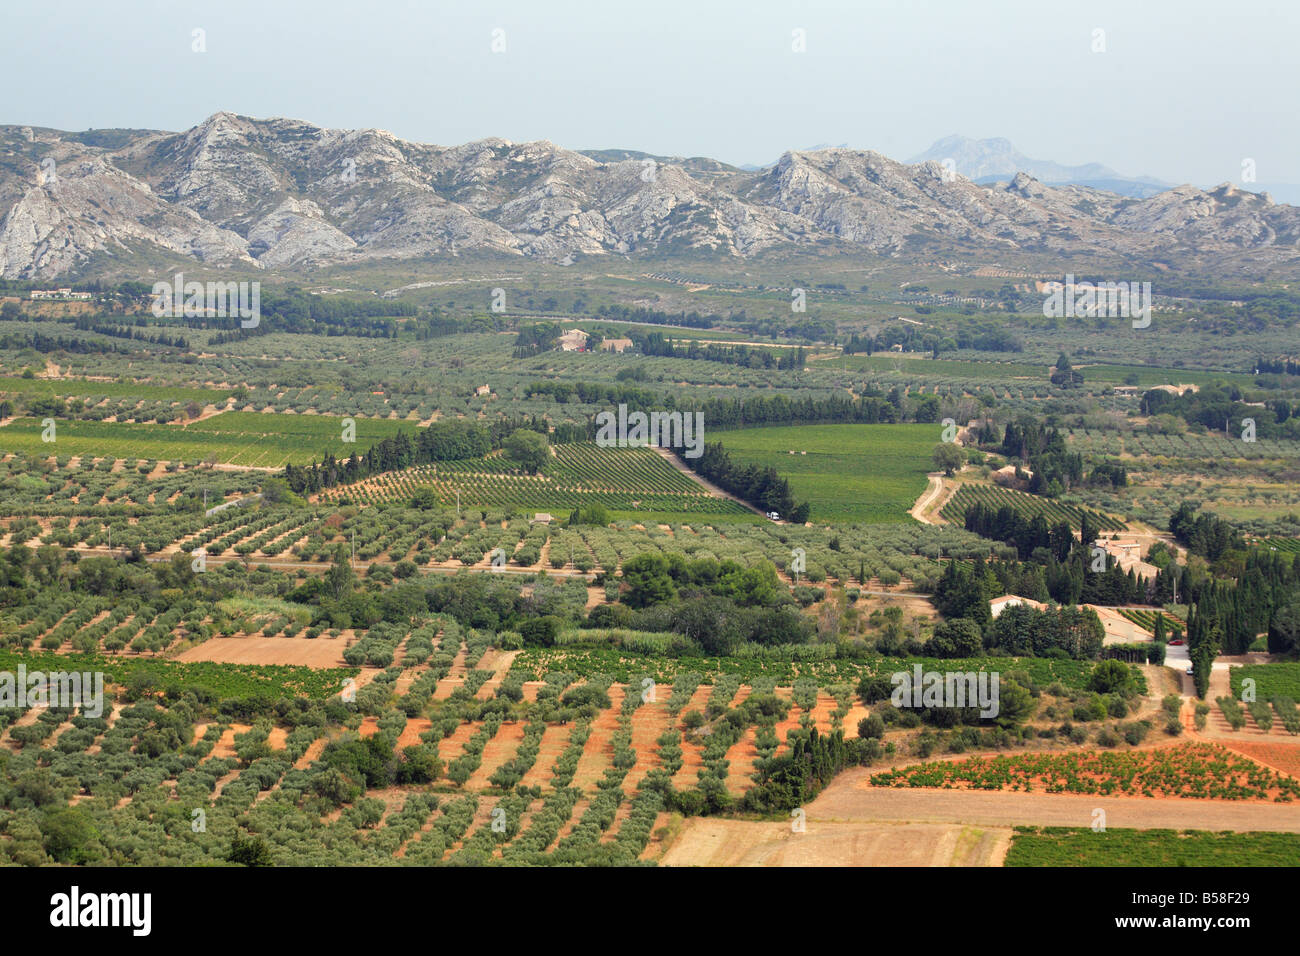 Mountains and vinyards in Baux-de-Provence, France Stock Photo